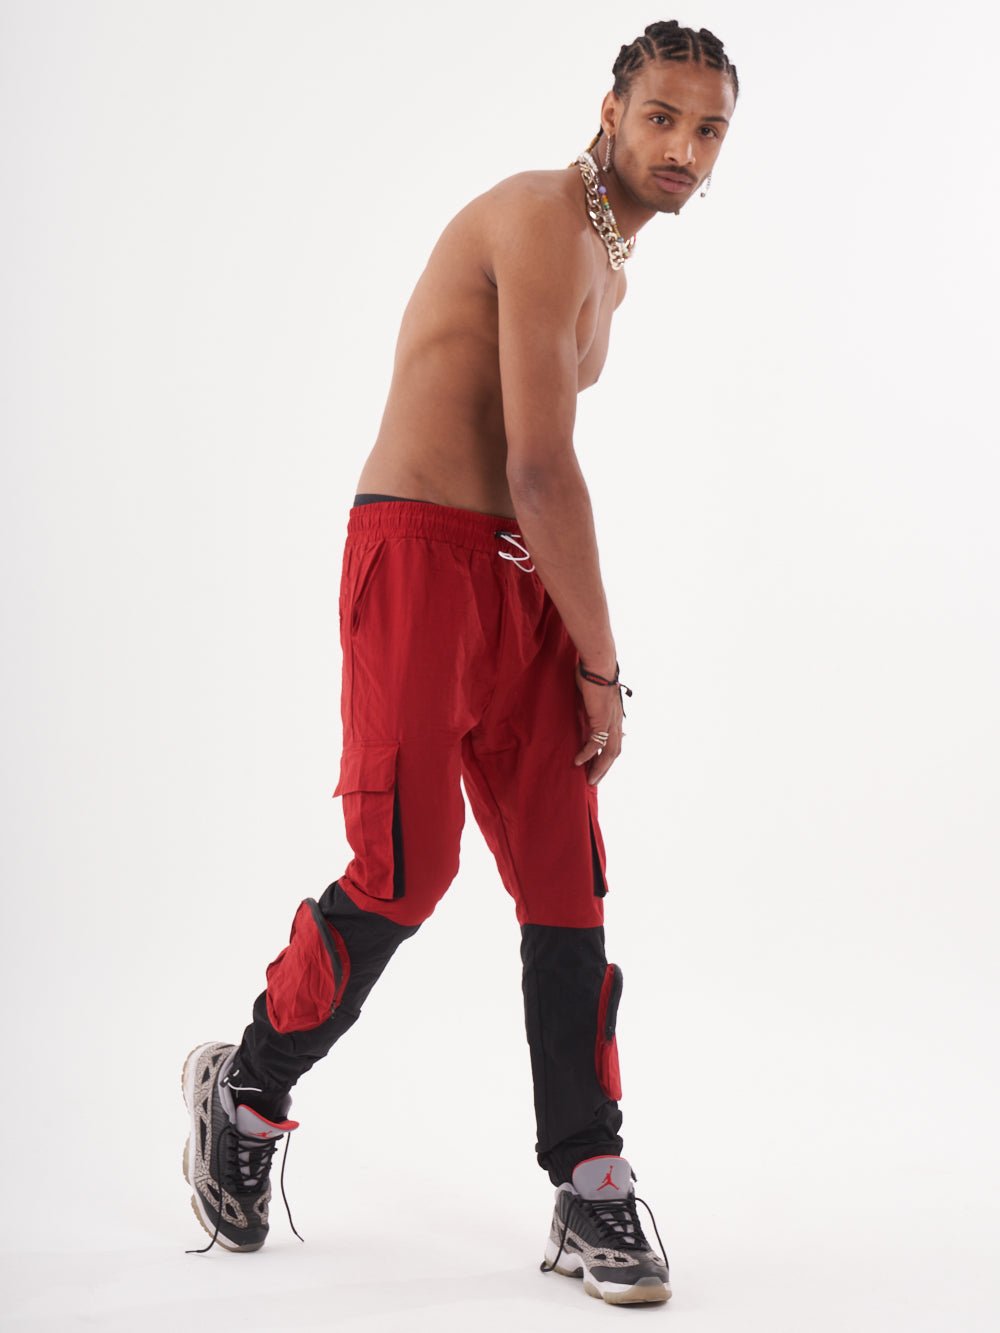 A man in RENEGADE | RED joggers posing in front of a white background.